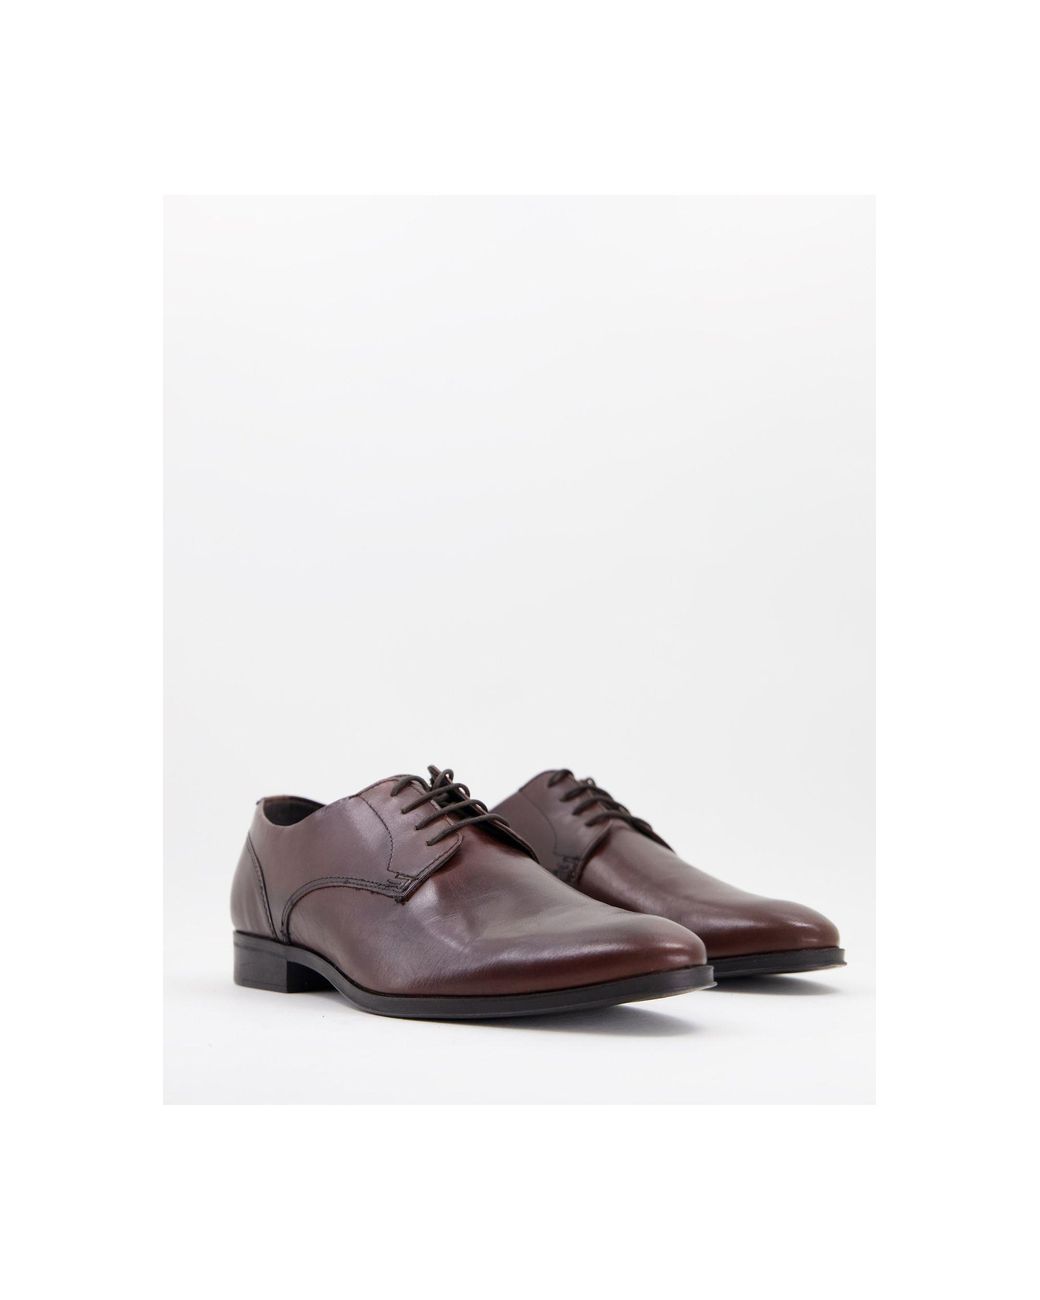 ASOS Leather Derby Shoes in Brown for Men - Lyst